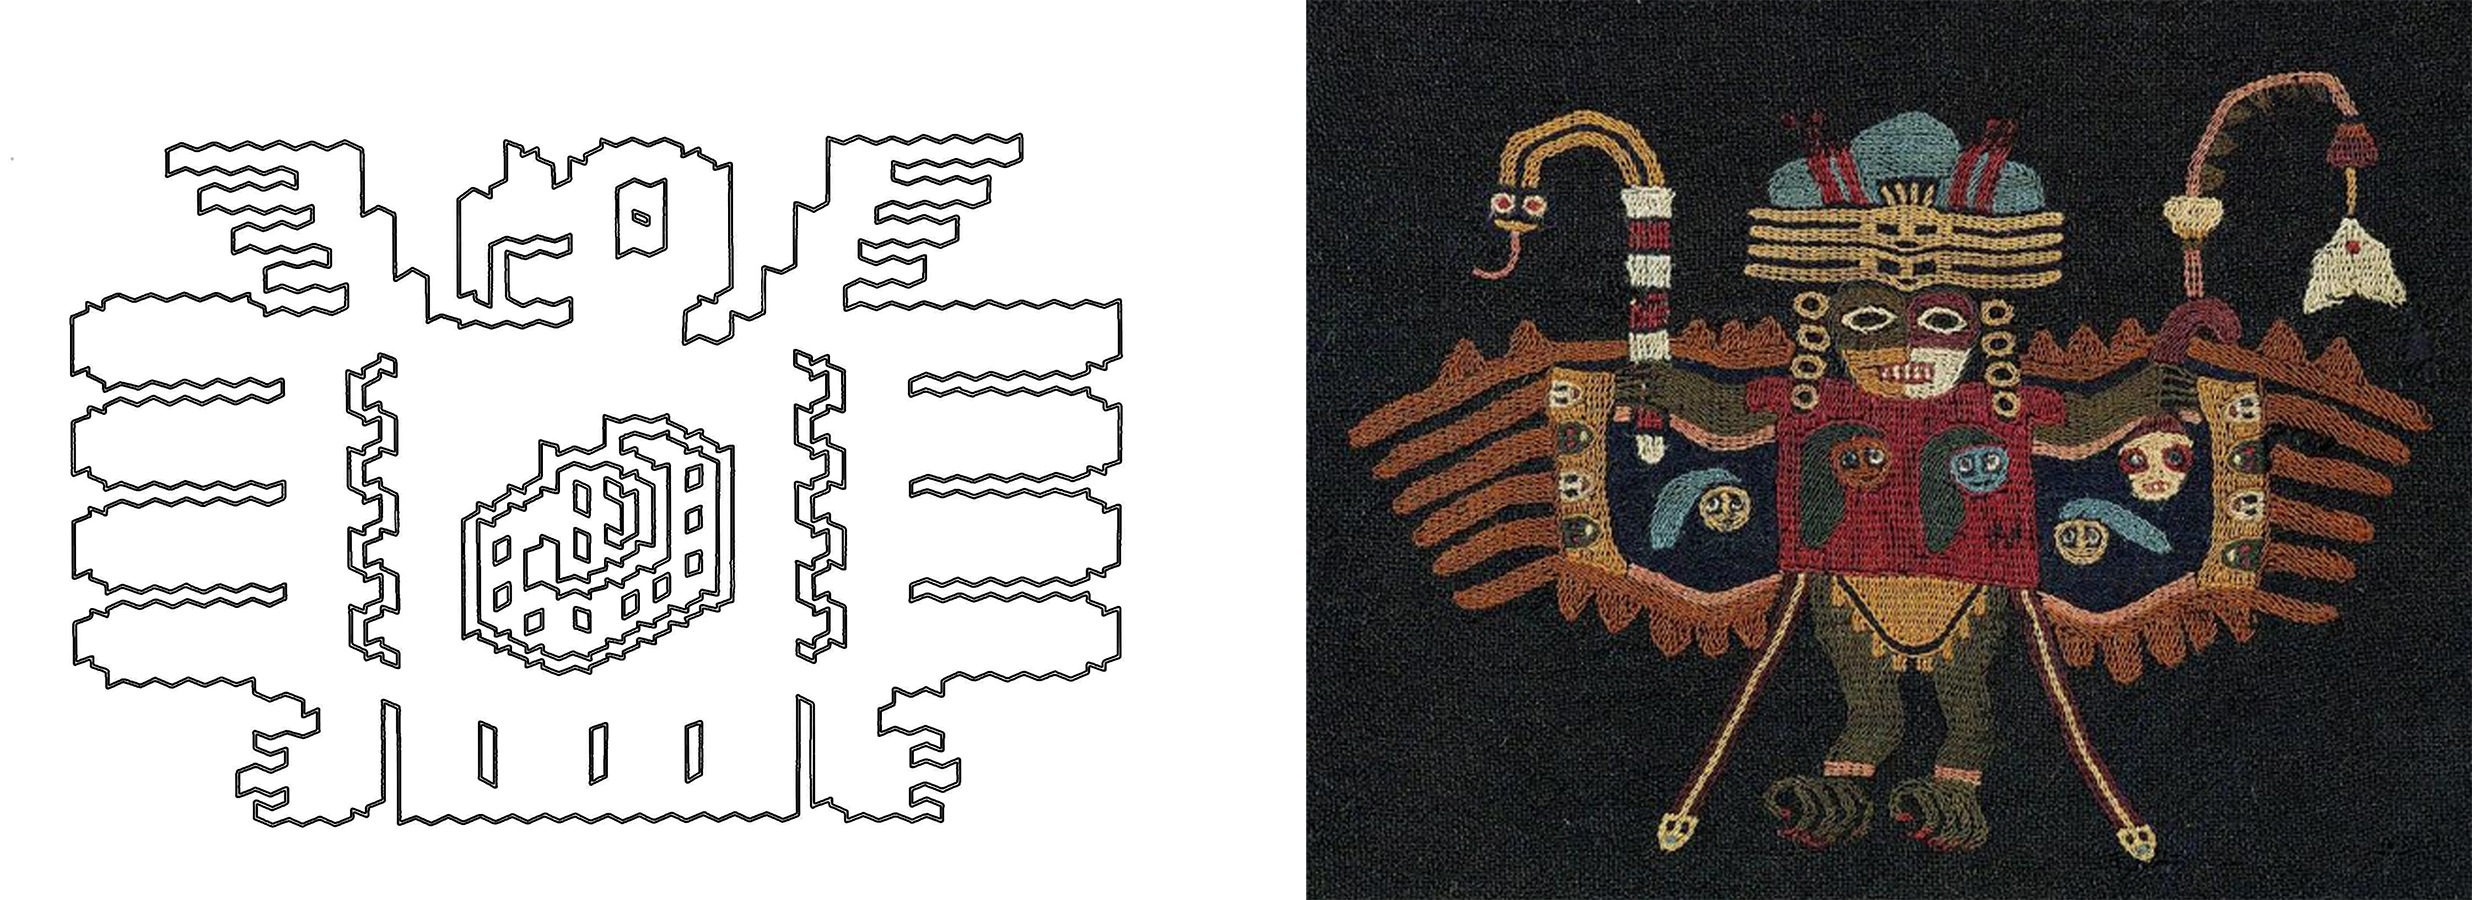 Left: Design from a Huaca Prieta textile showing a condor with a serpent or fish in its stomach (redrawn from Bird, 1963); Right: Detail, Man's mantle and two border fragments, Paracas, 50–100 C.E., wool plain weave, embroidered with wool, 101 x 244.3 cm (Museum of Fine Arts, Boston)